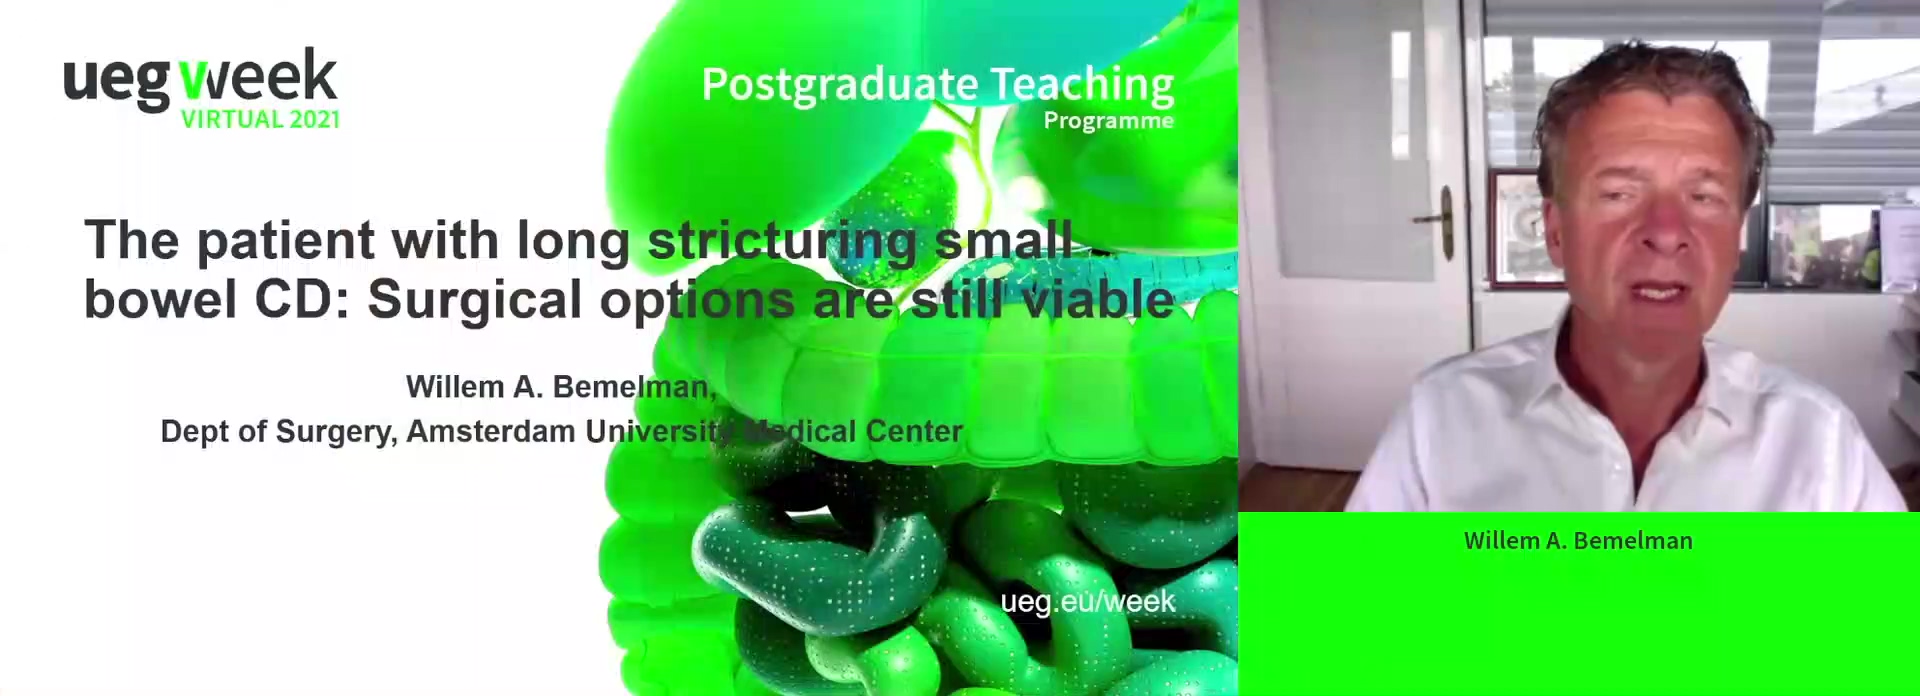 The patient with long stricturing small bowel CD: Surgical options are still viable